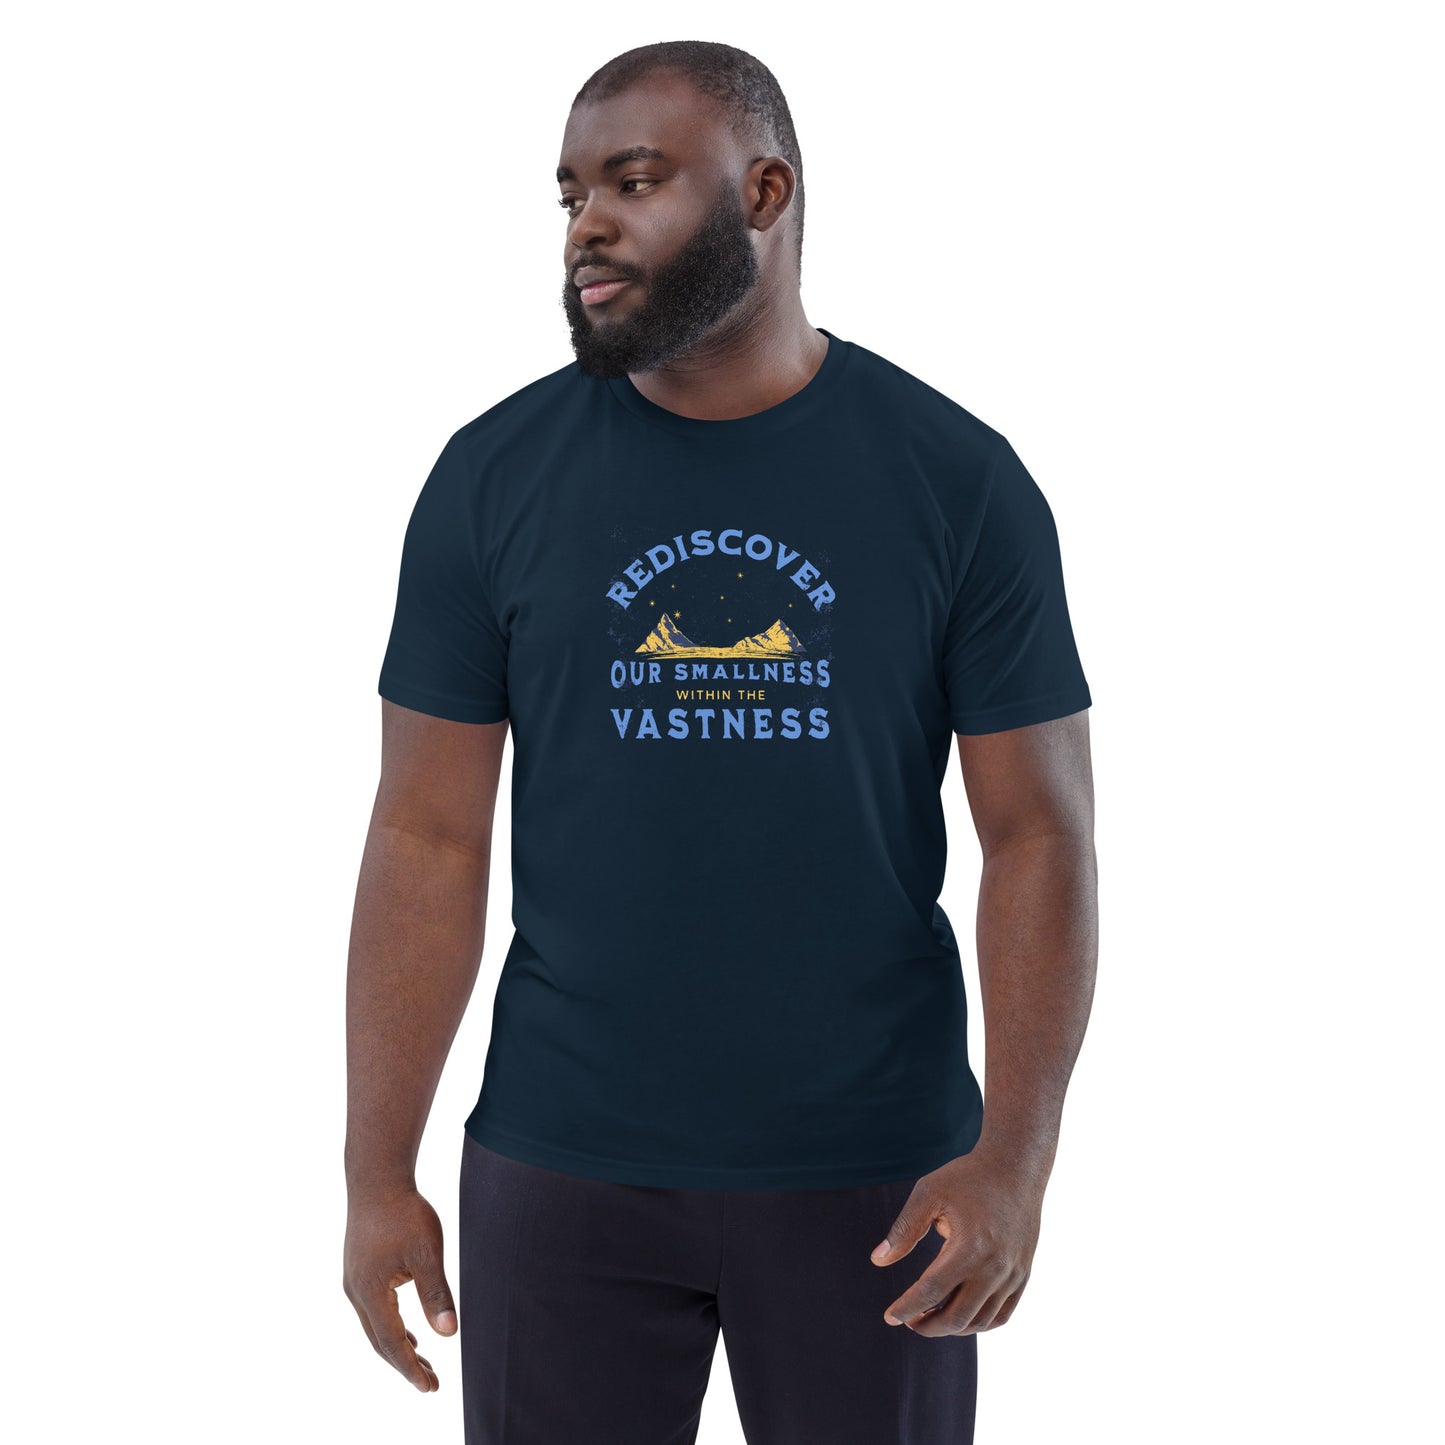 Unisex organic cotton t-shirt - Our Smallness In The Vastness